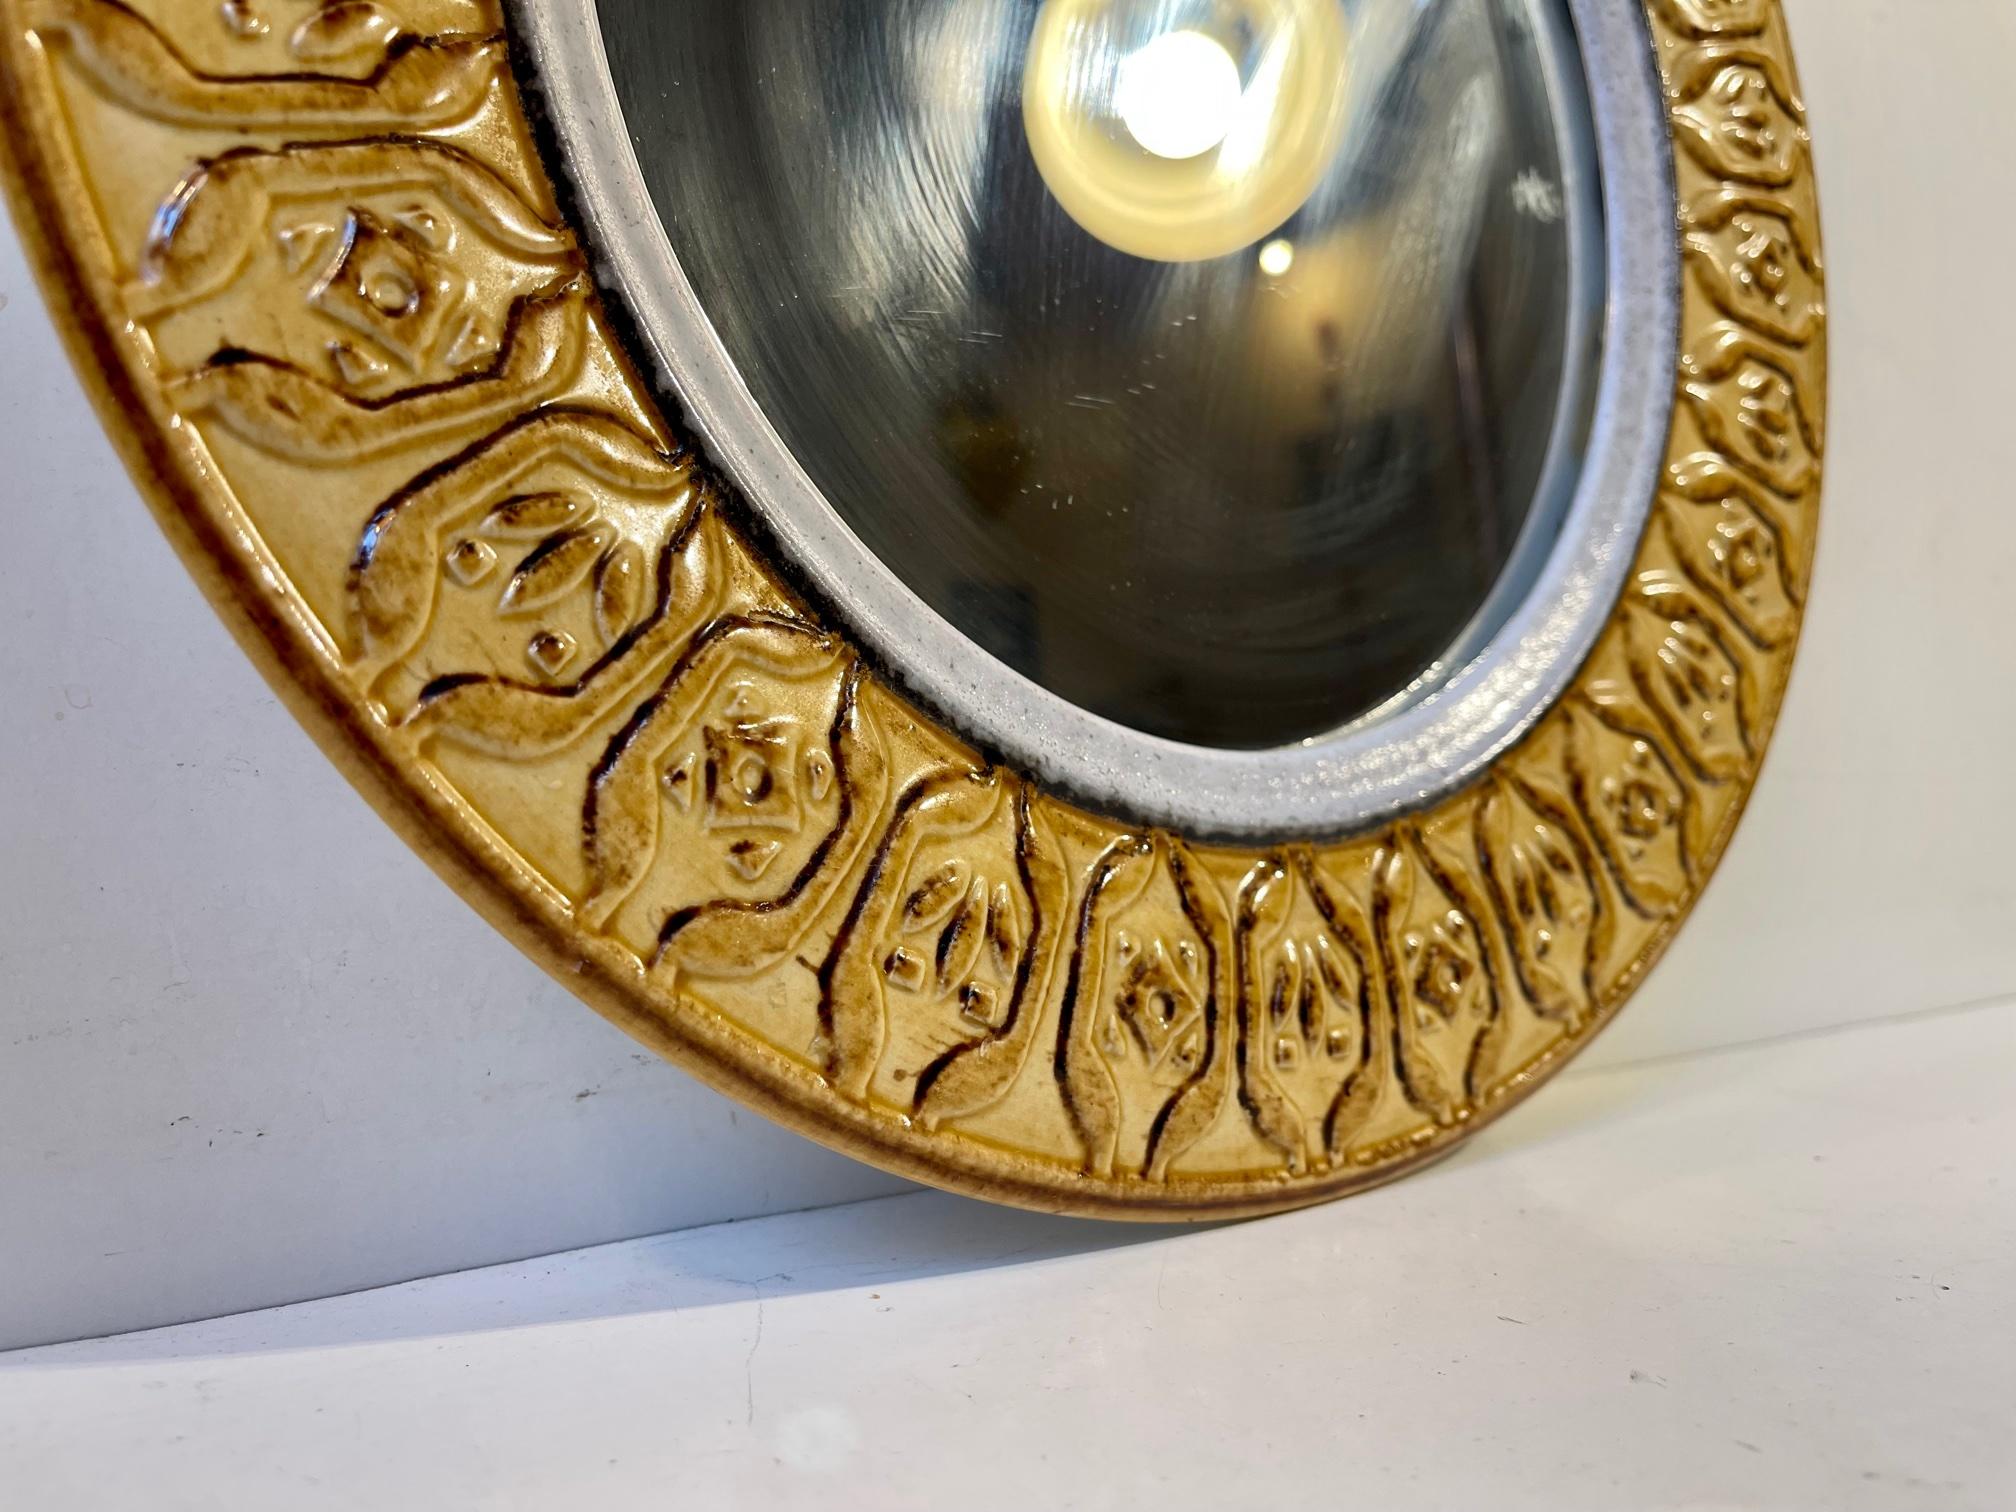 A decorative circular wall mirror in ocre yellow glazed ceramic. It was made in Italy during the 1970s, probably by Bitossi. It has no markings except from a partial price tag from the Danish retailer 'Magasin' that sold it. Measurements: Diameter: